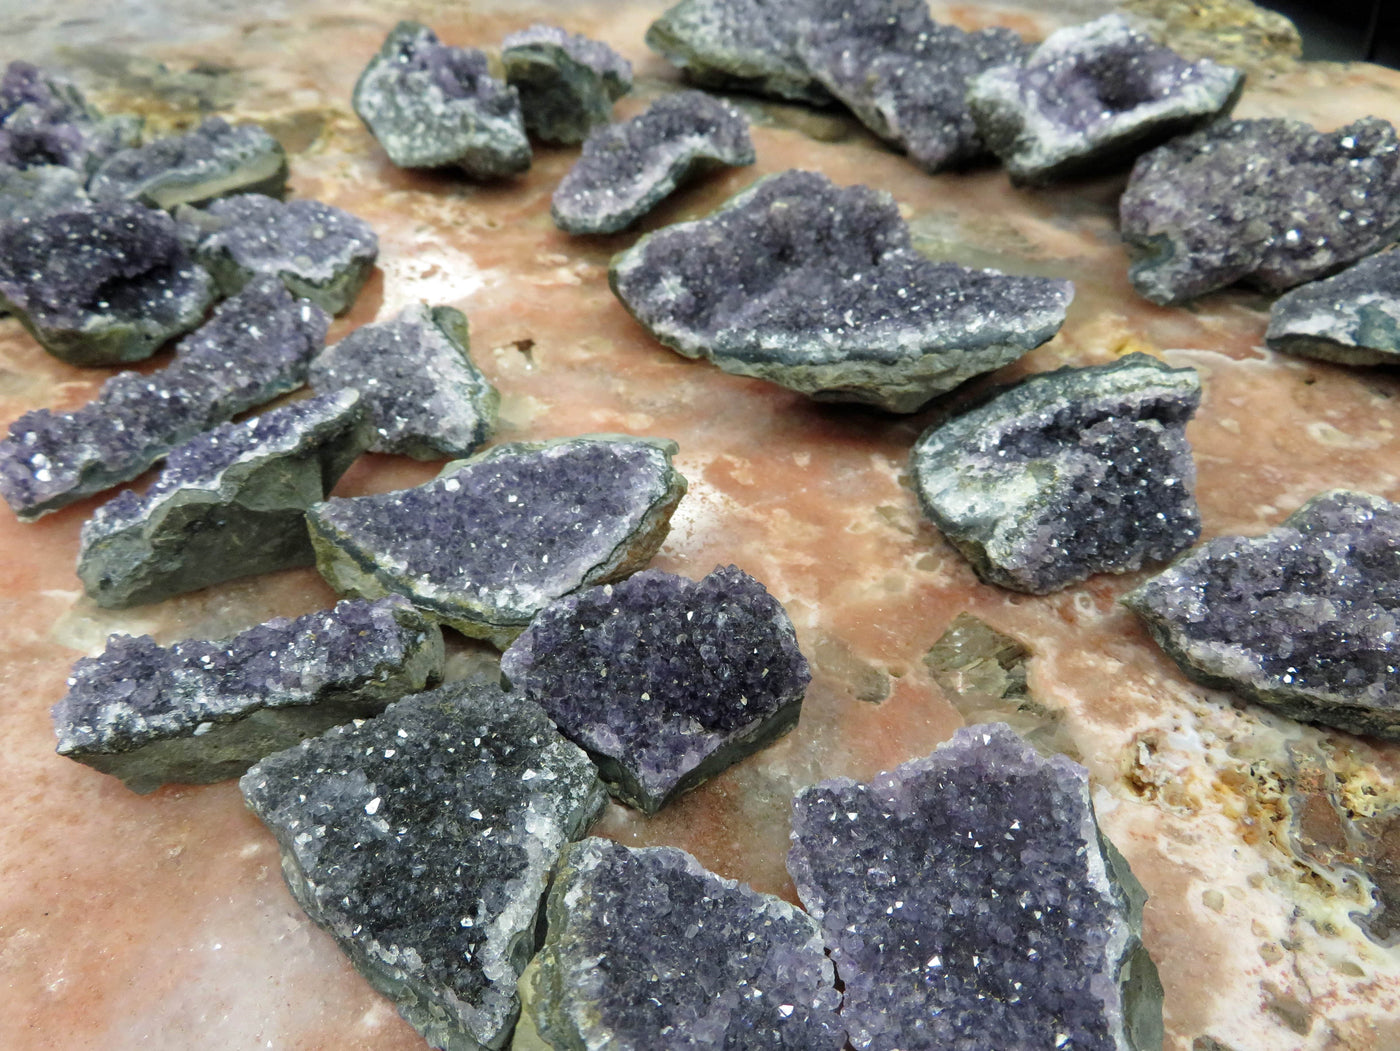 There are 3 Rows of amethyst clusters lined up next to each other in this picture. The amethyst Clusters are being displayed on a marbled surface.